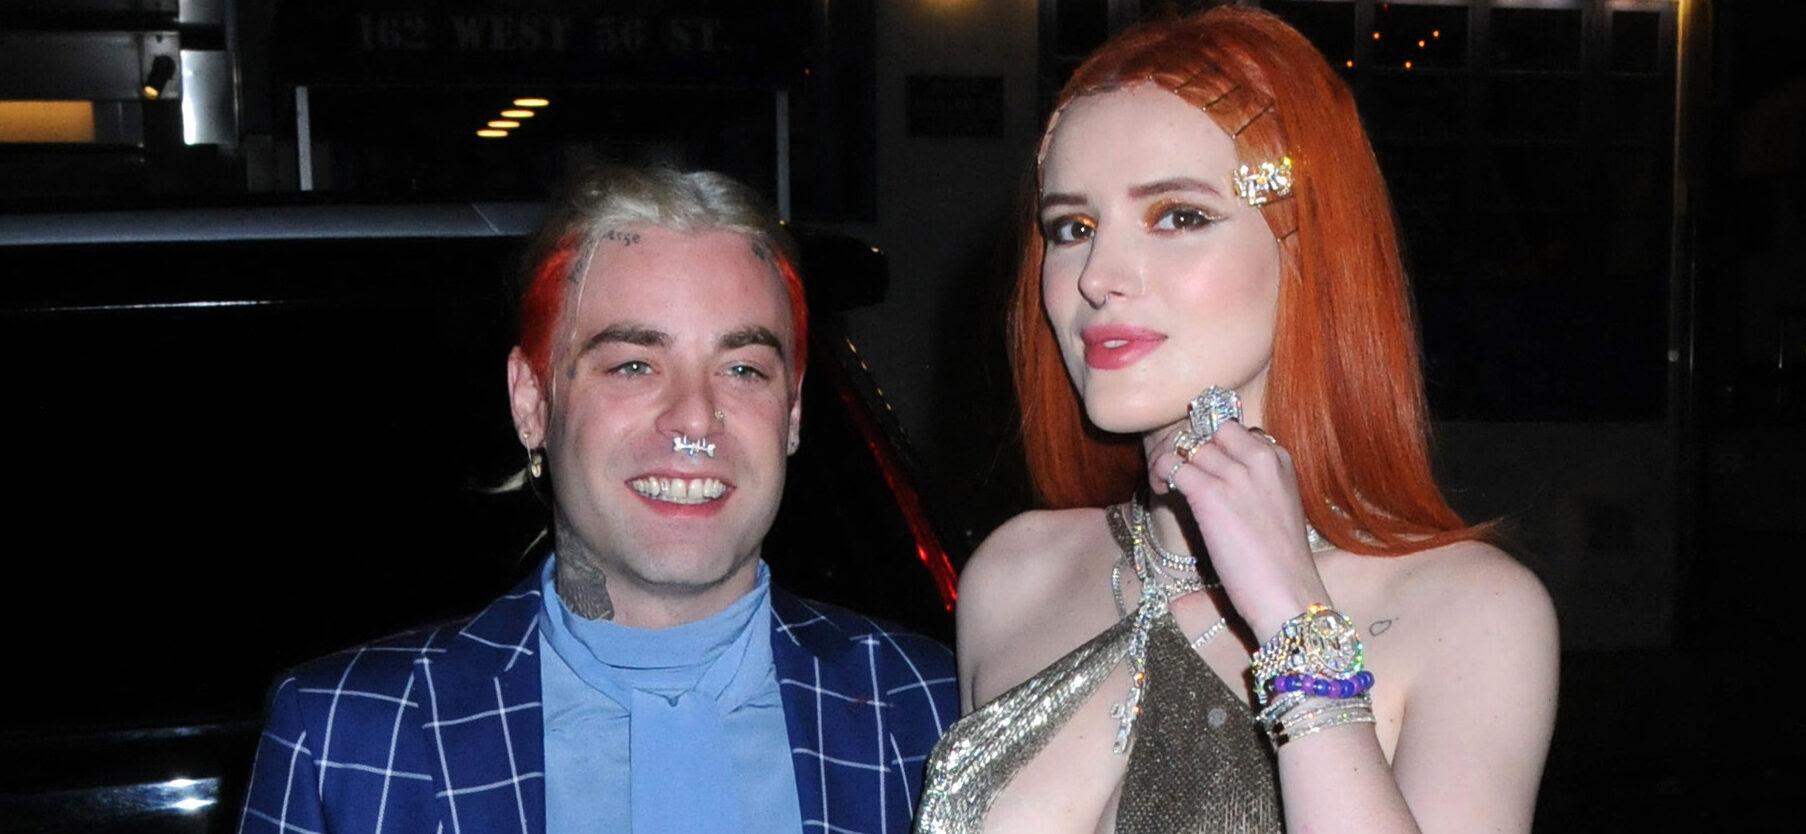 Mod Sun Credits 2019 Breakup With Bella Thorne For His Sobriety: 'I’m So F–king Grateful'